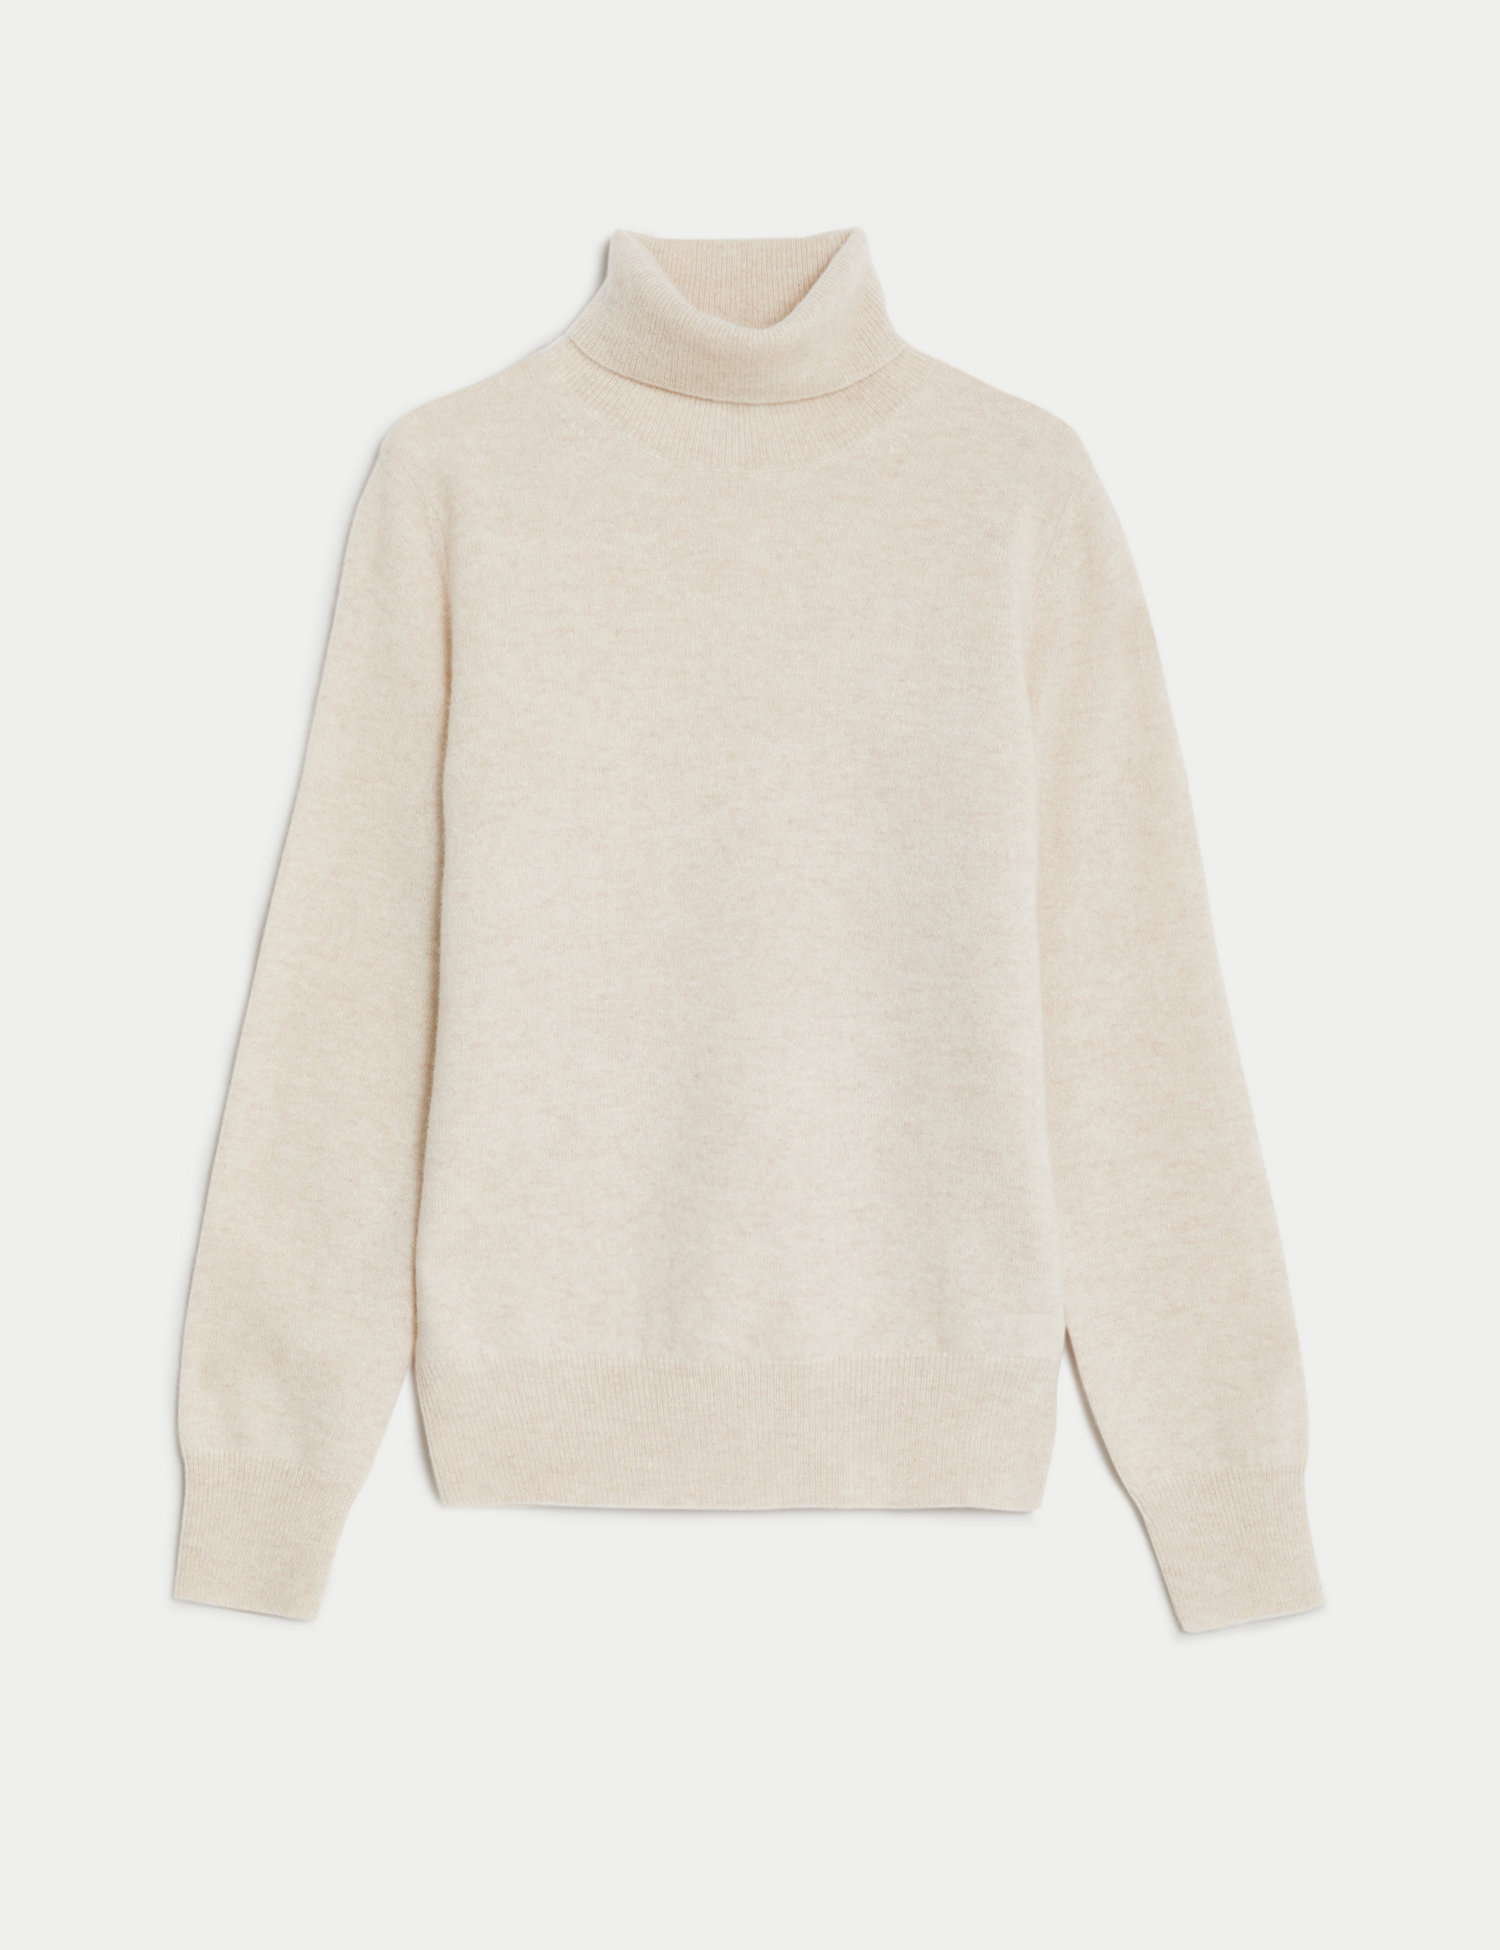 25 Marks & Spencer Knitwear Pieces We Really Rate | Who What Wear UK